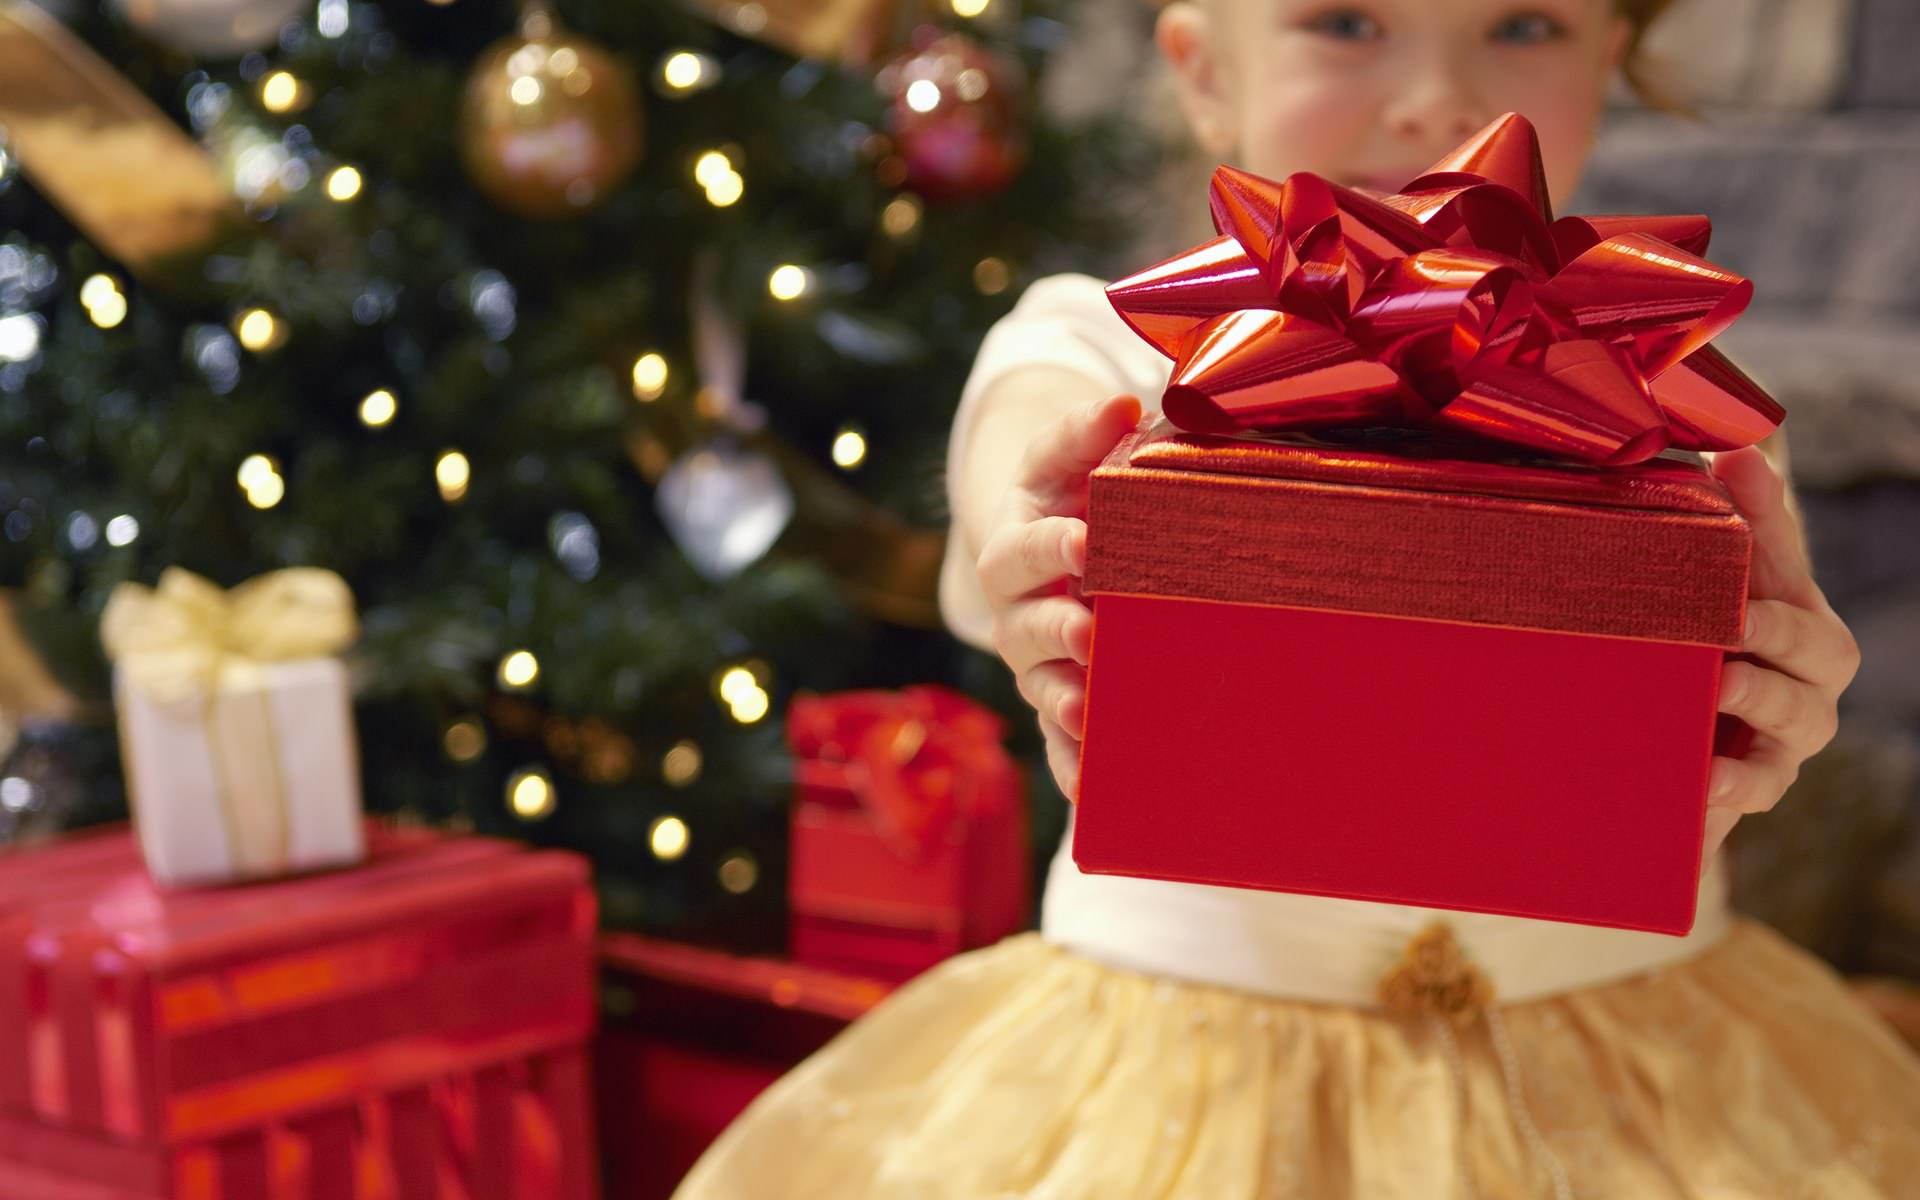 Here’s Why You Should Cherish Family Over The Festive Period – #6 Will Make You Cry